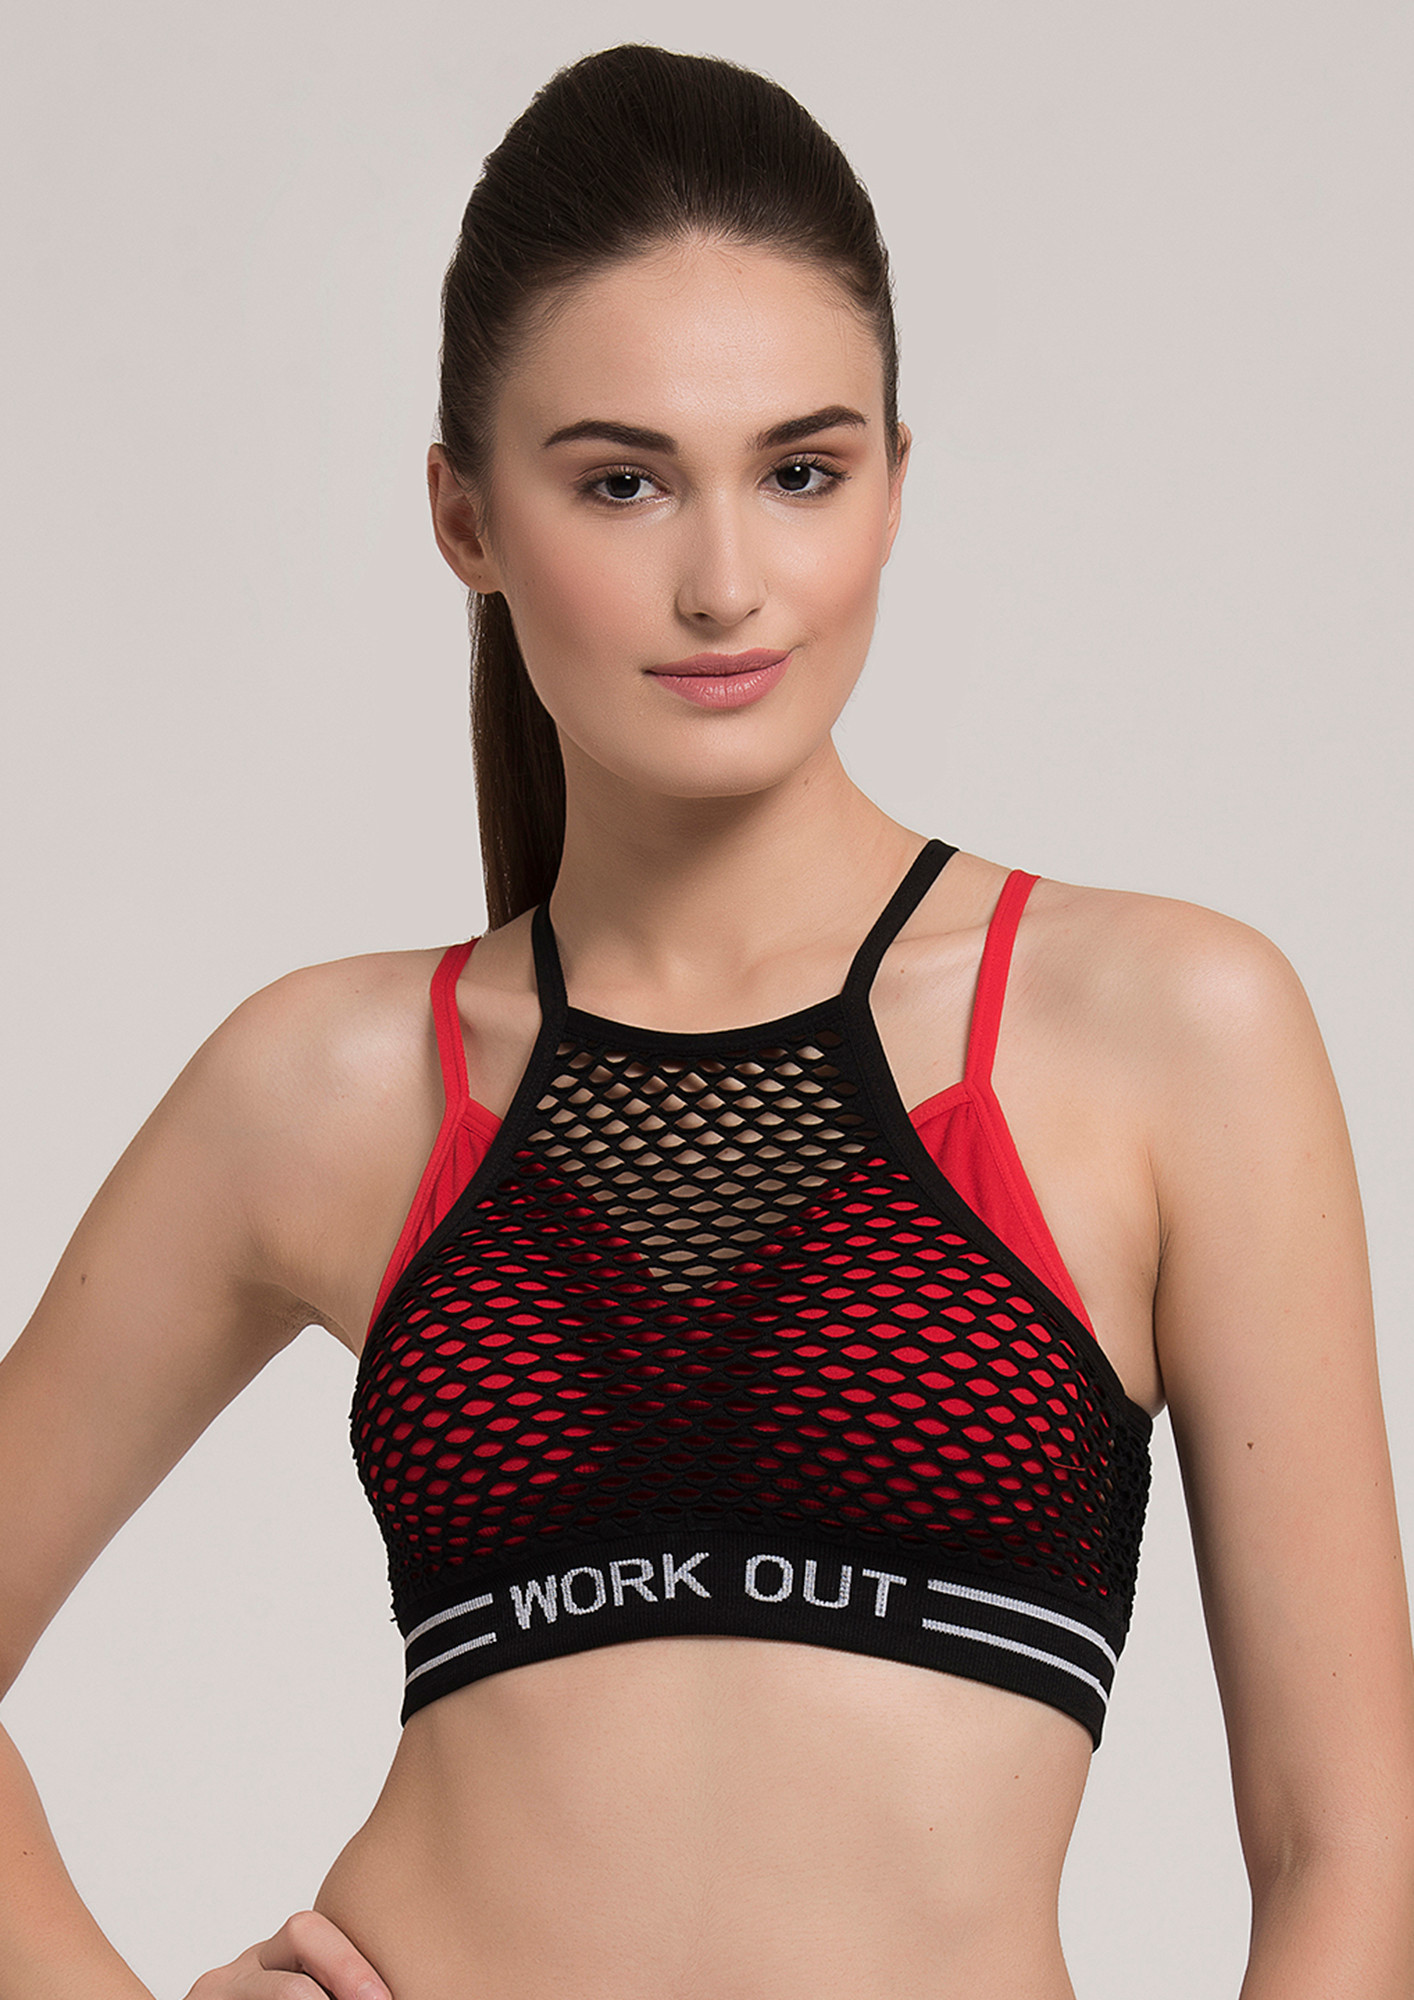 Makclan Strong in Sheer Red Sports Bra